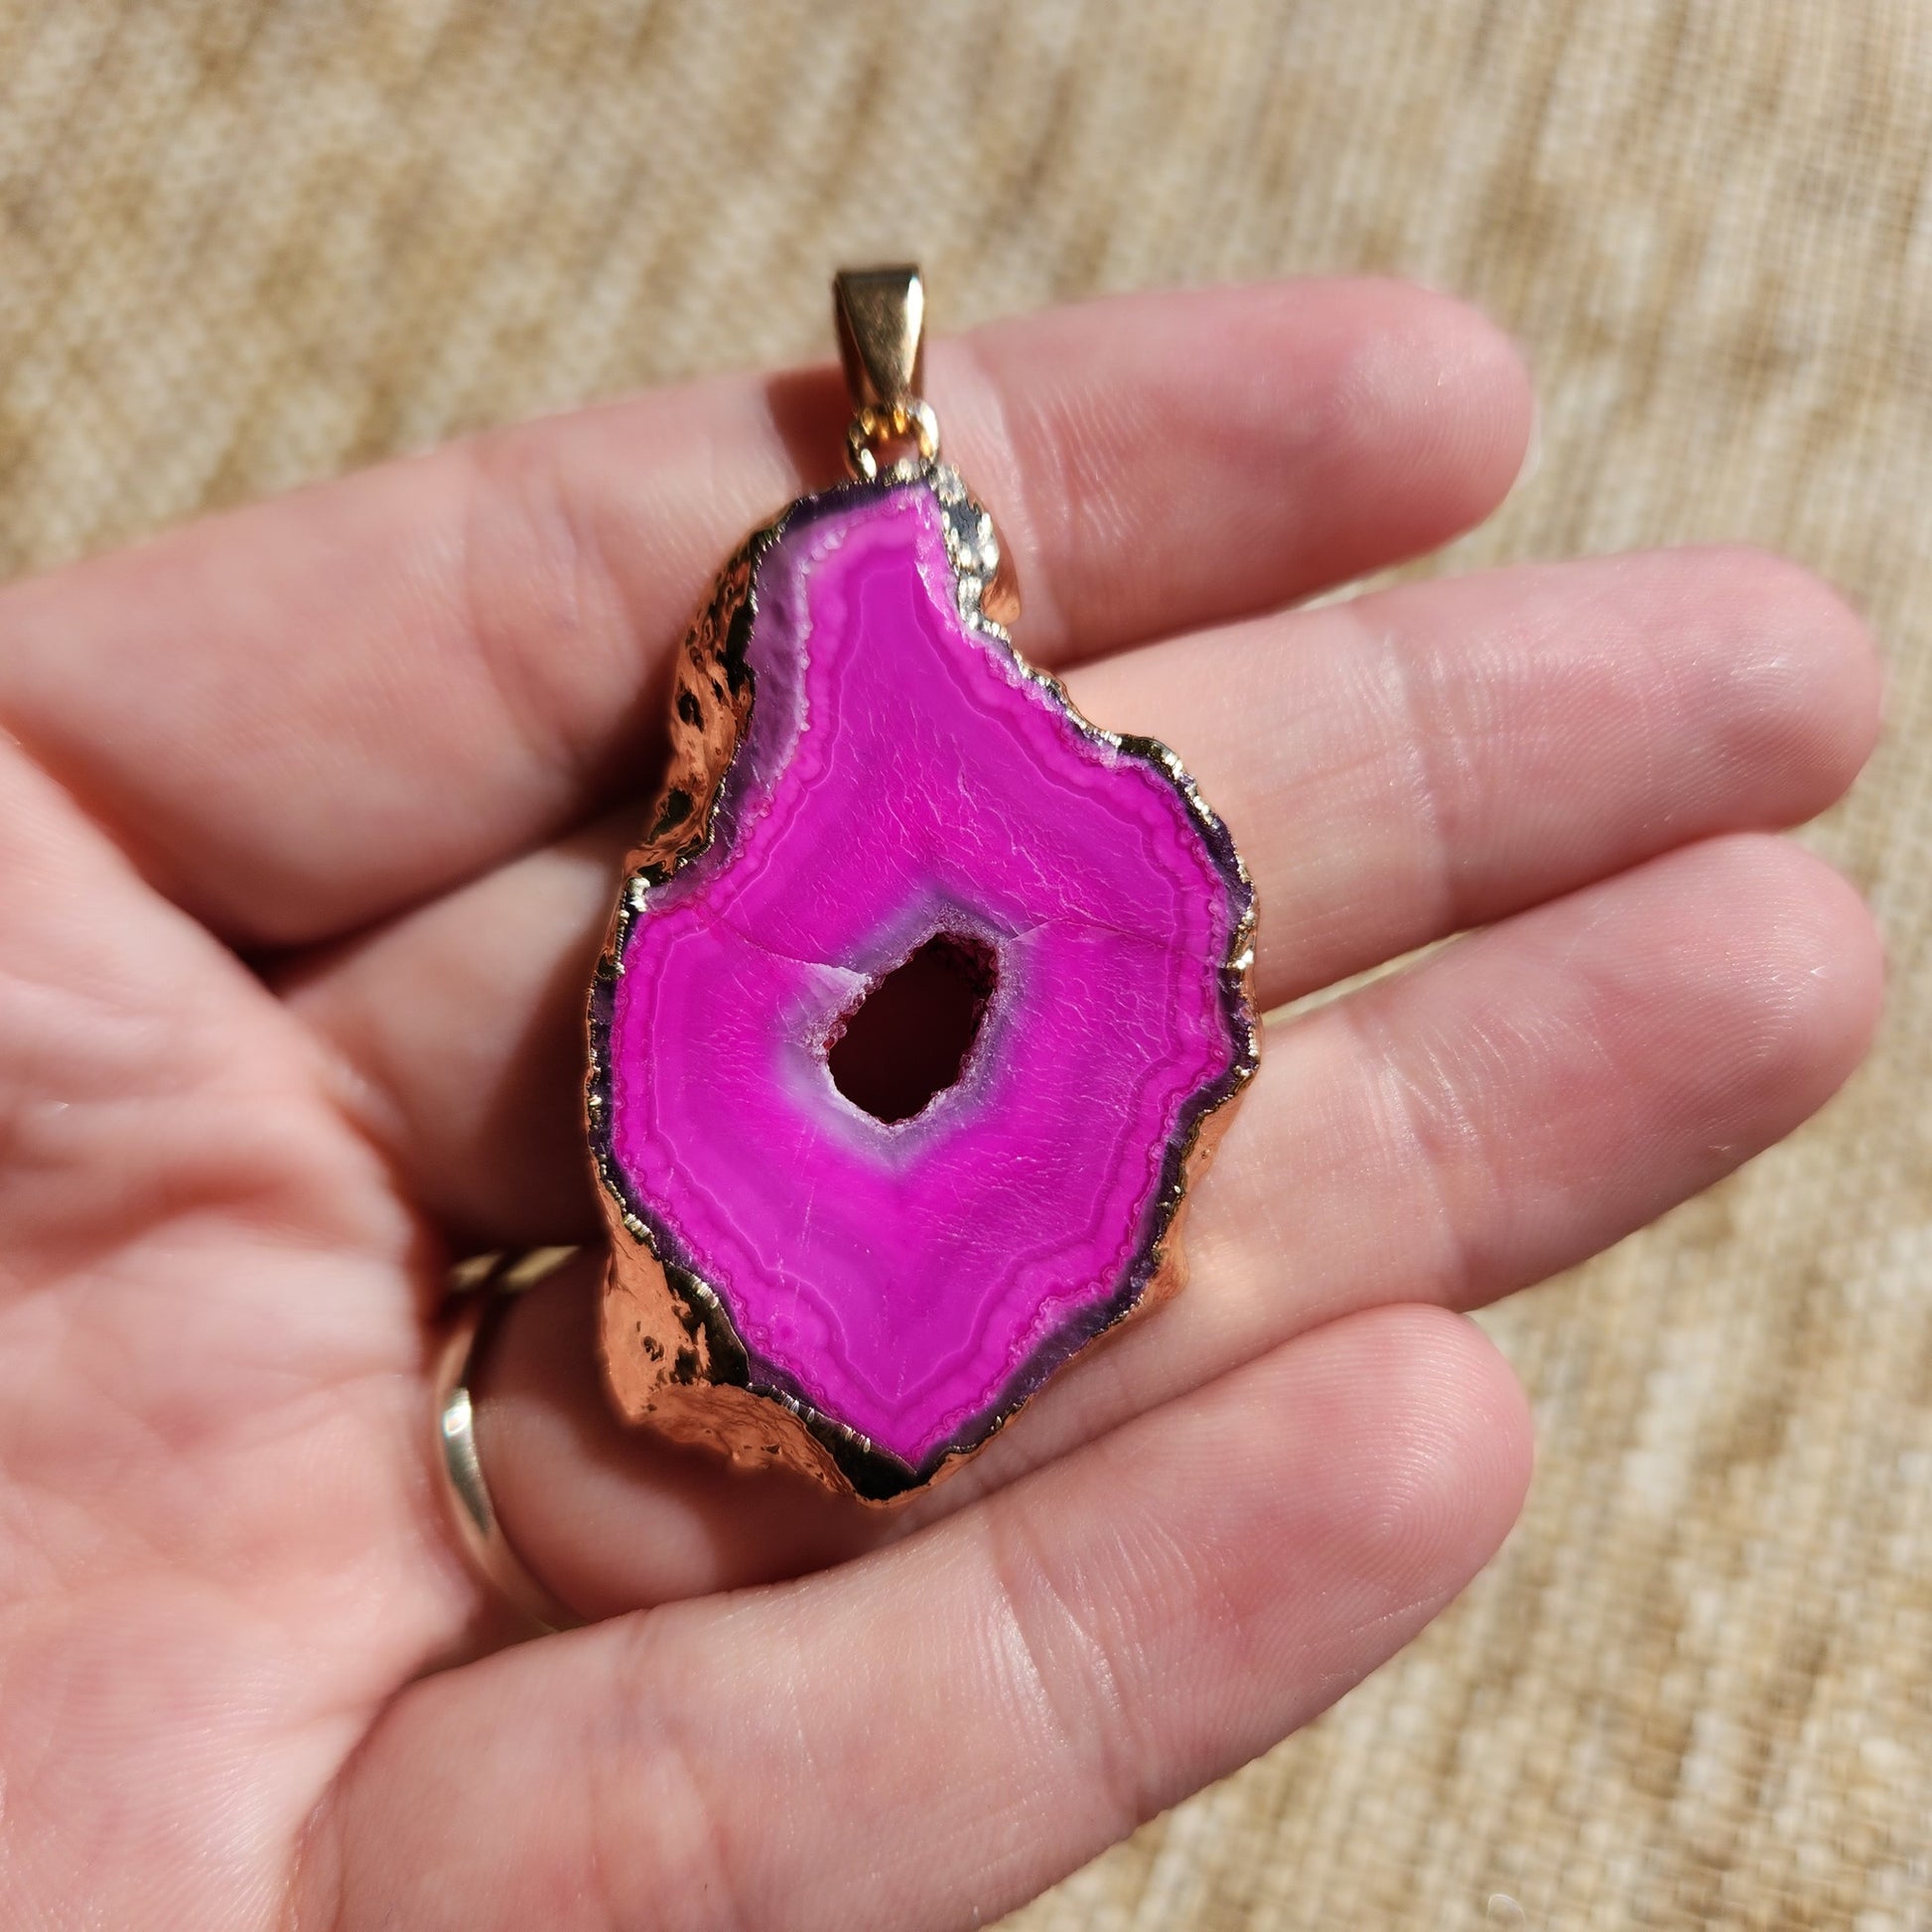 Dyed Agate Pendant